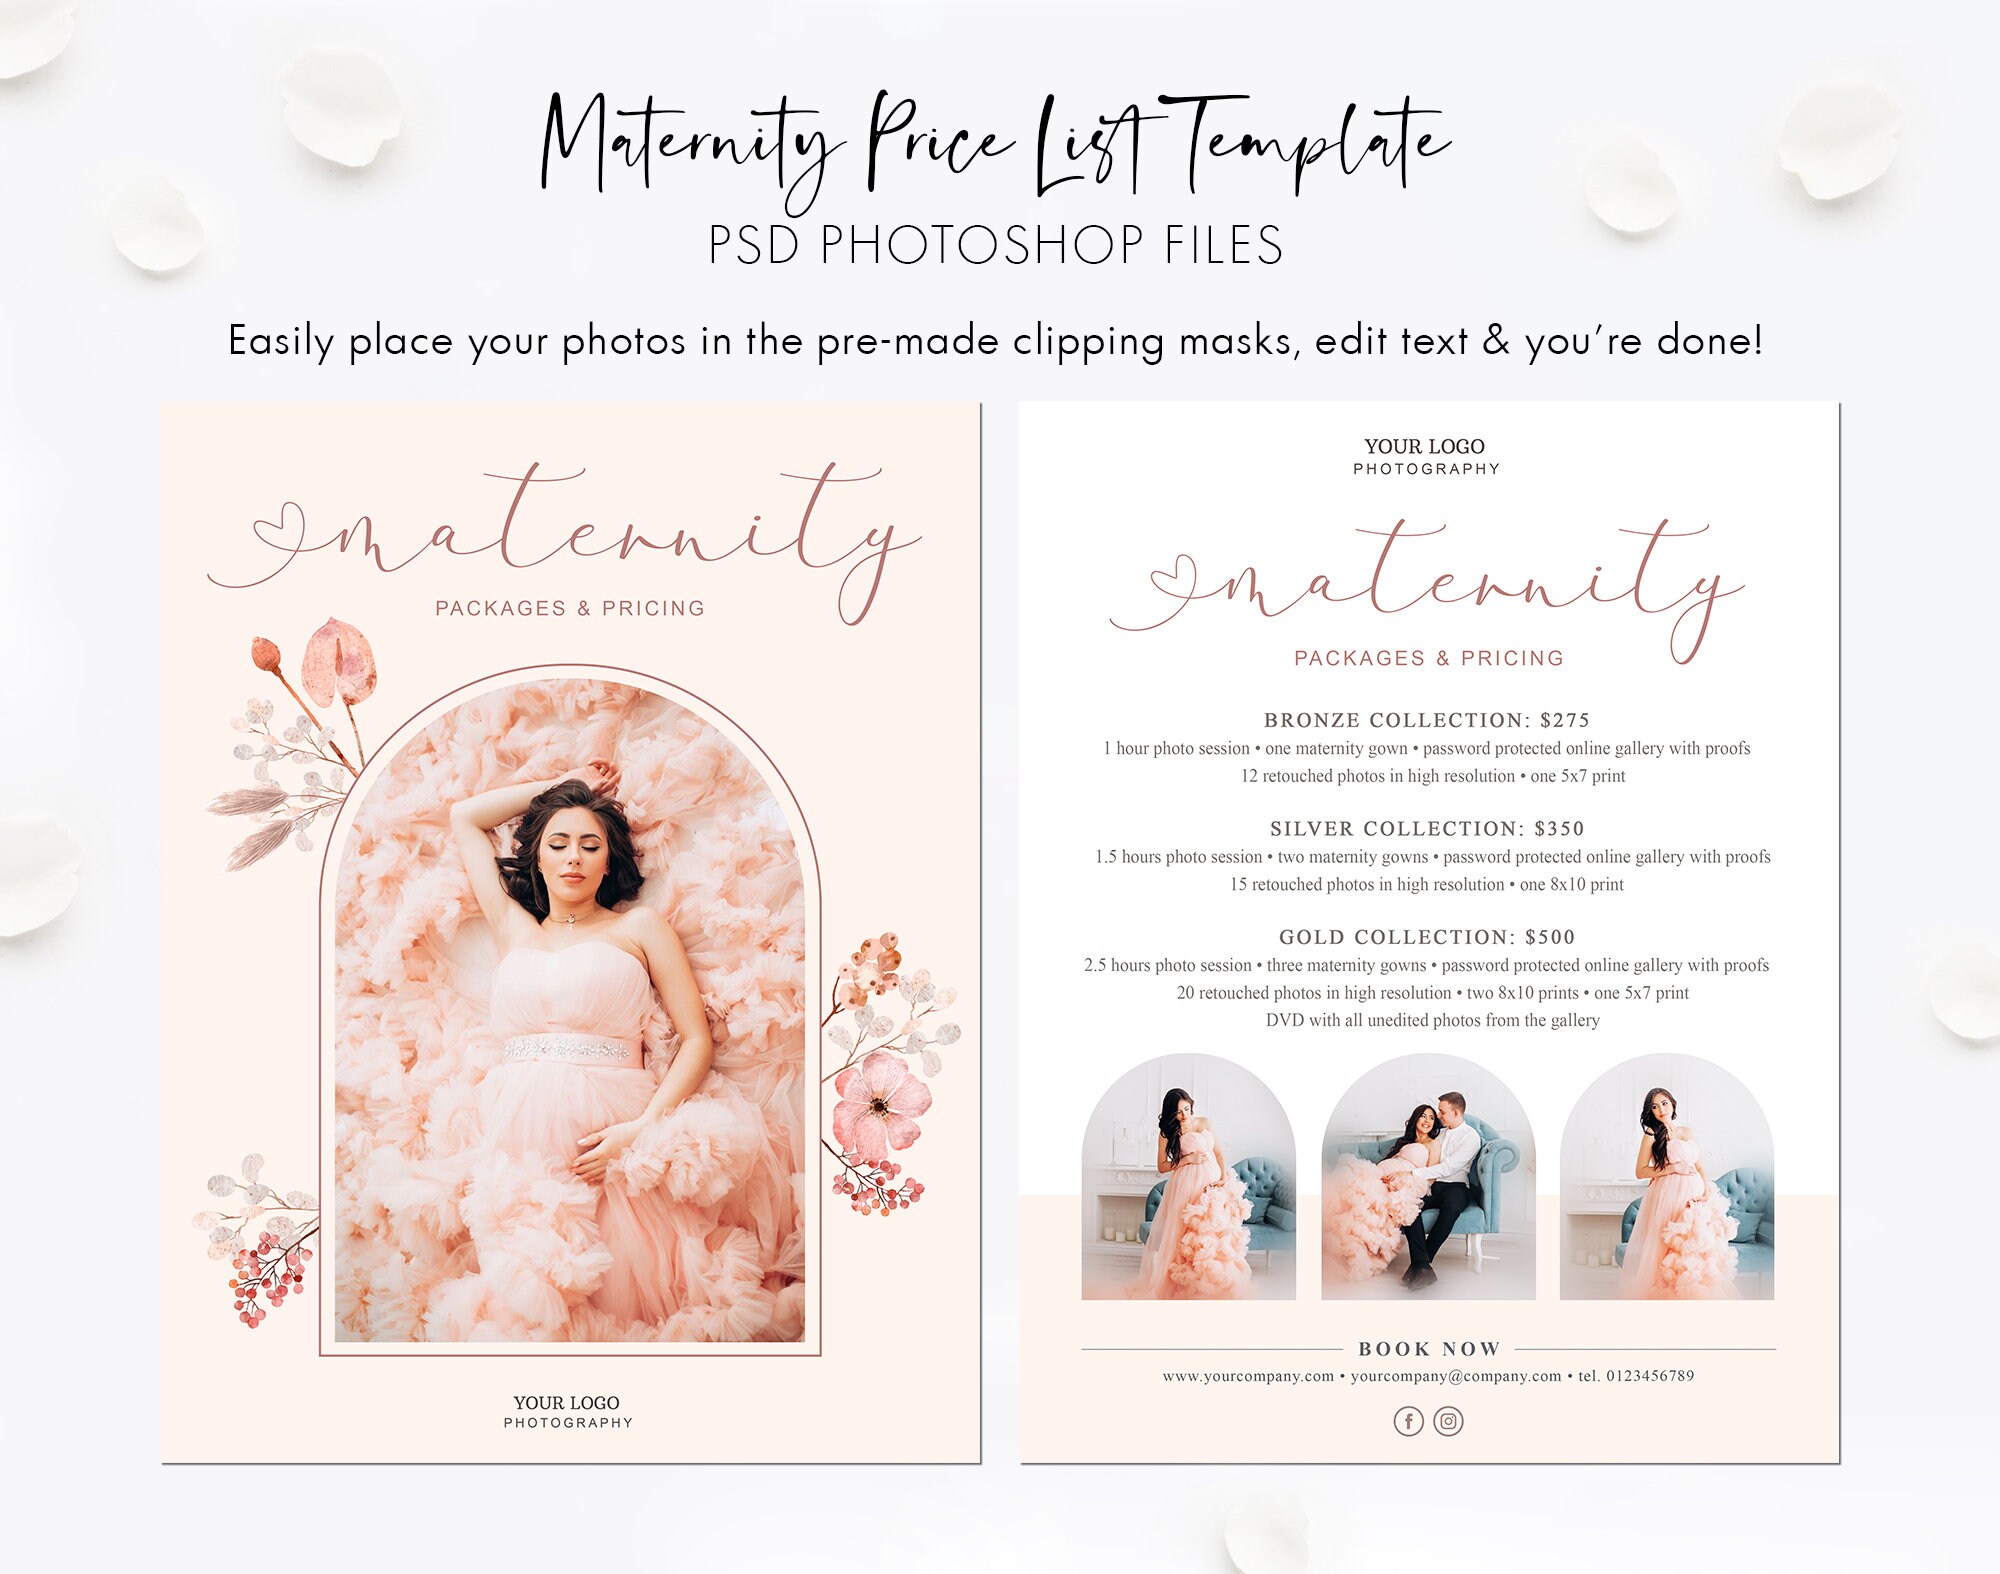 Price List Template. Maternity Photography Pricing Guide. - Etsy